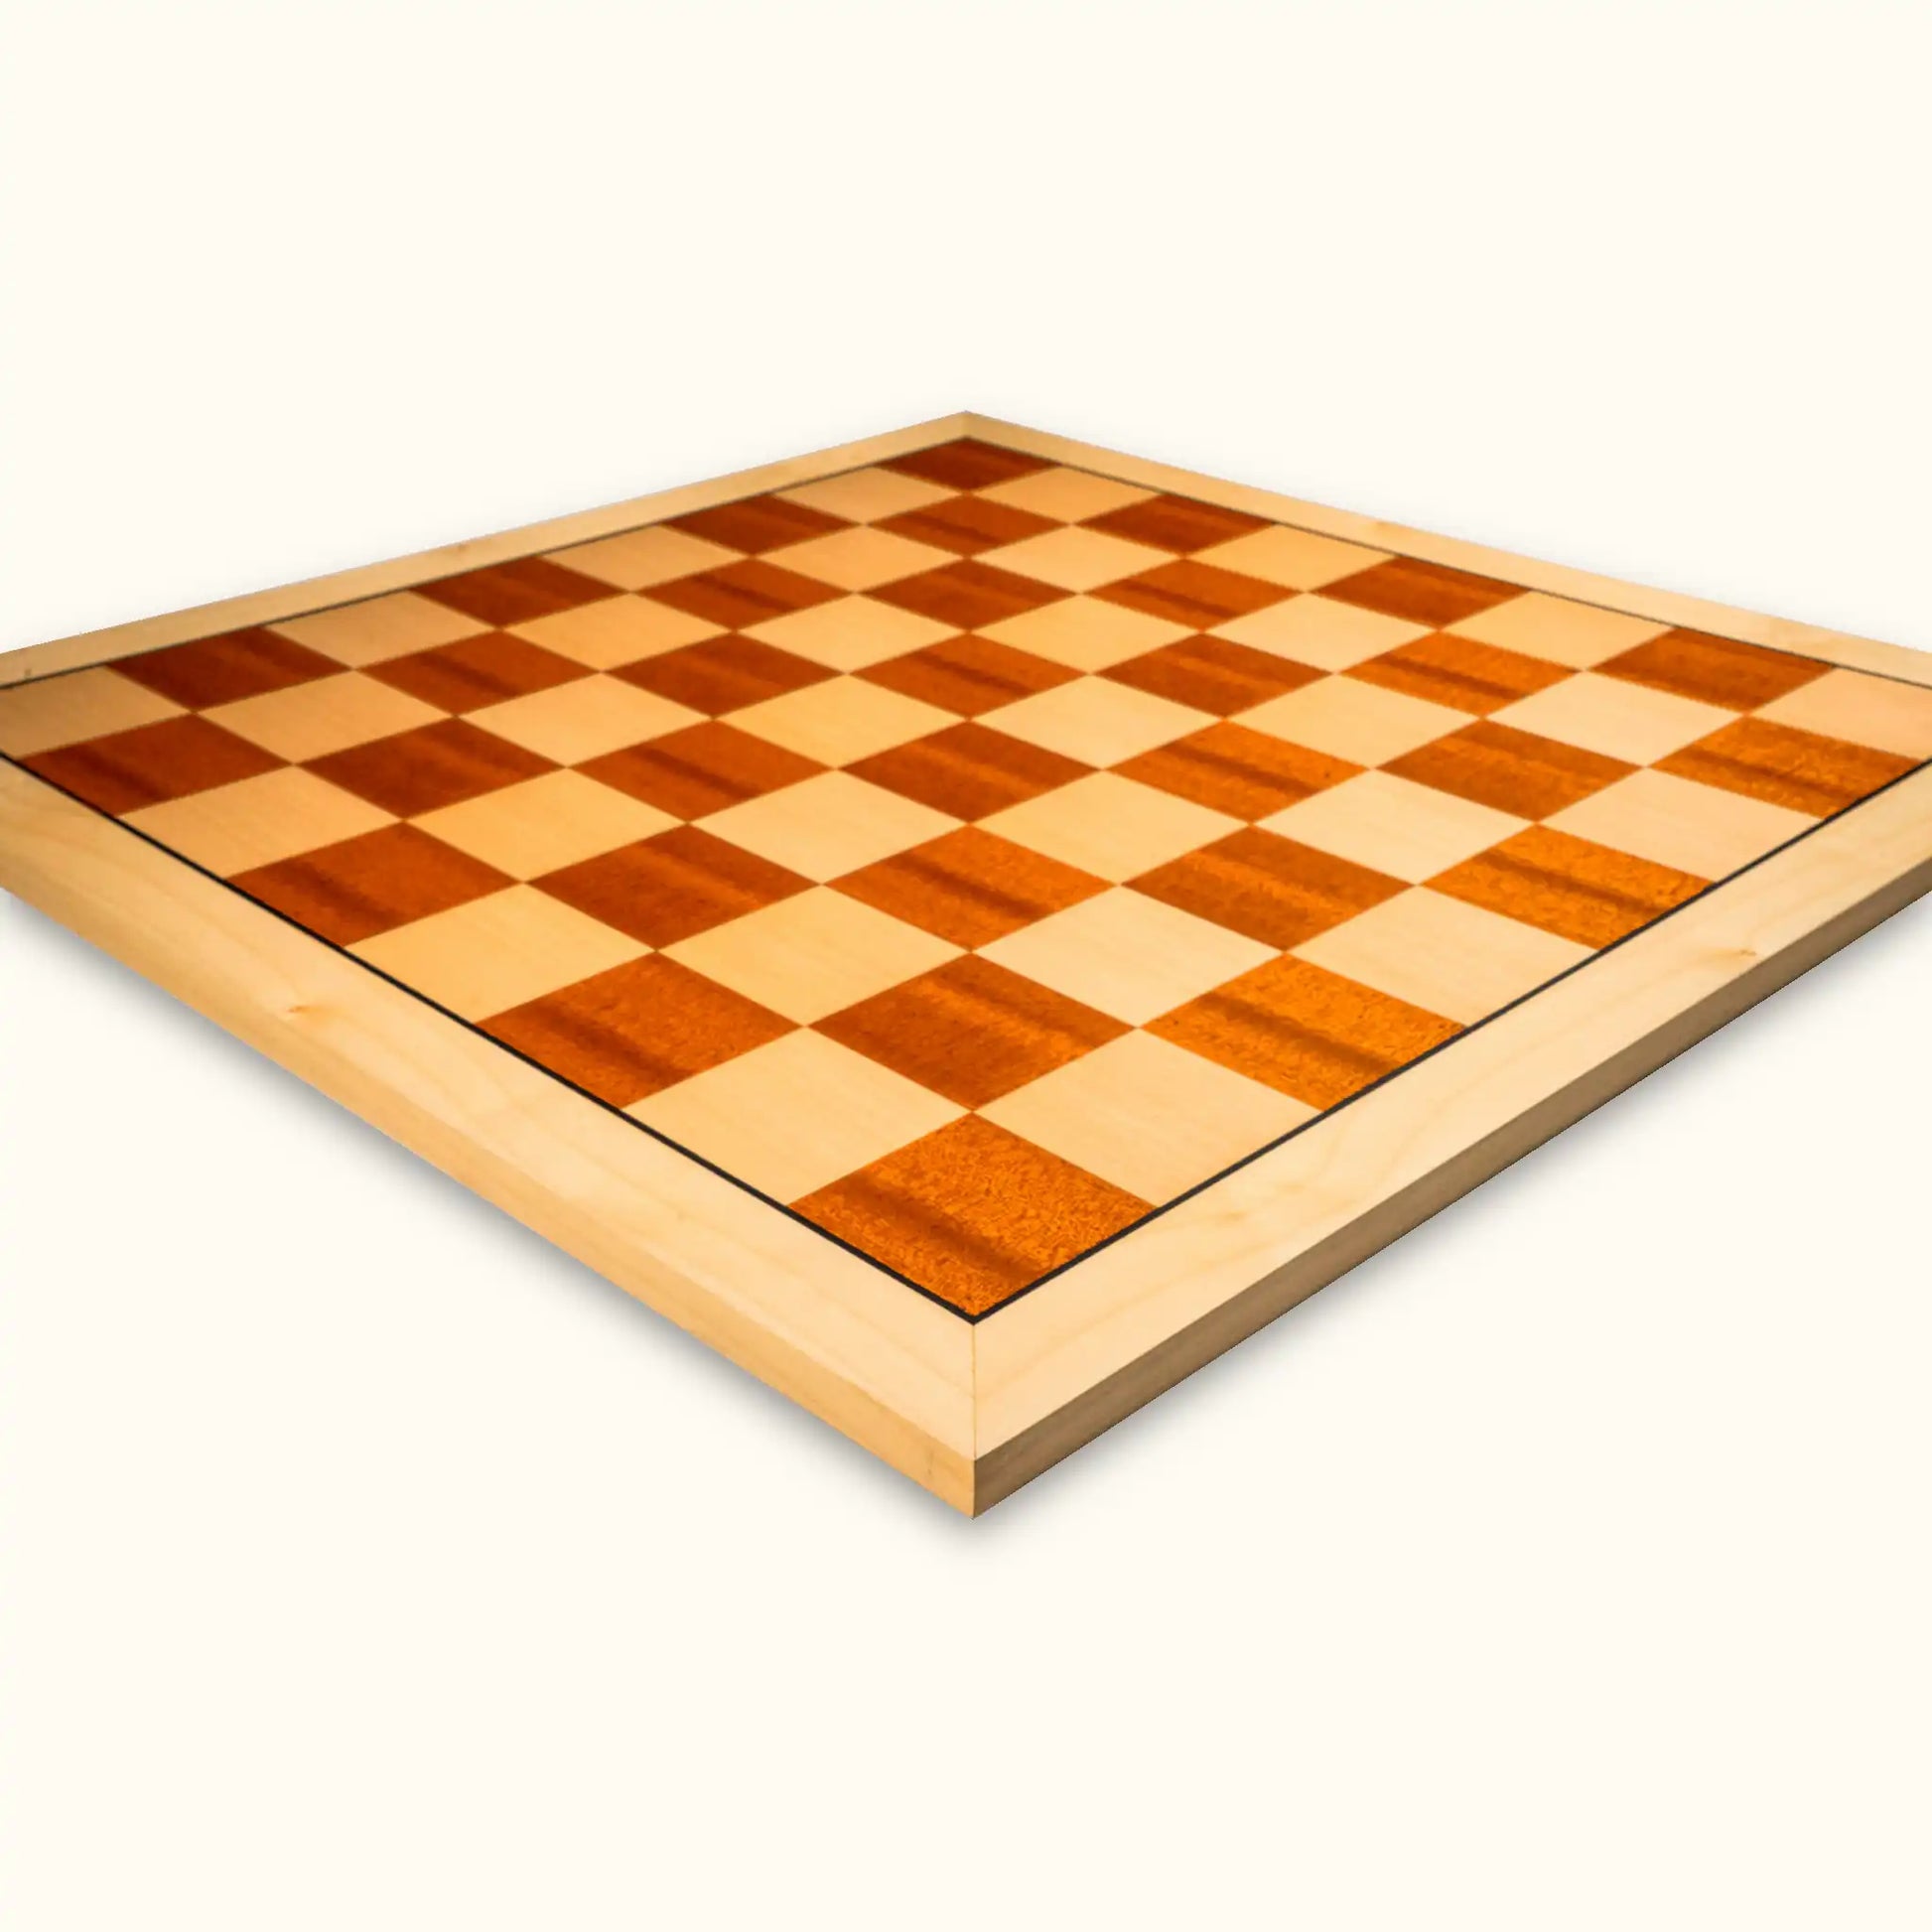 Chessboard Maple Standard 55 mm maple mahogany side view